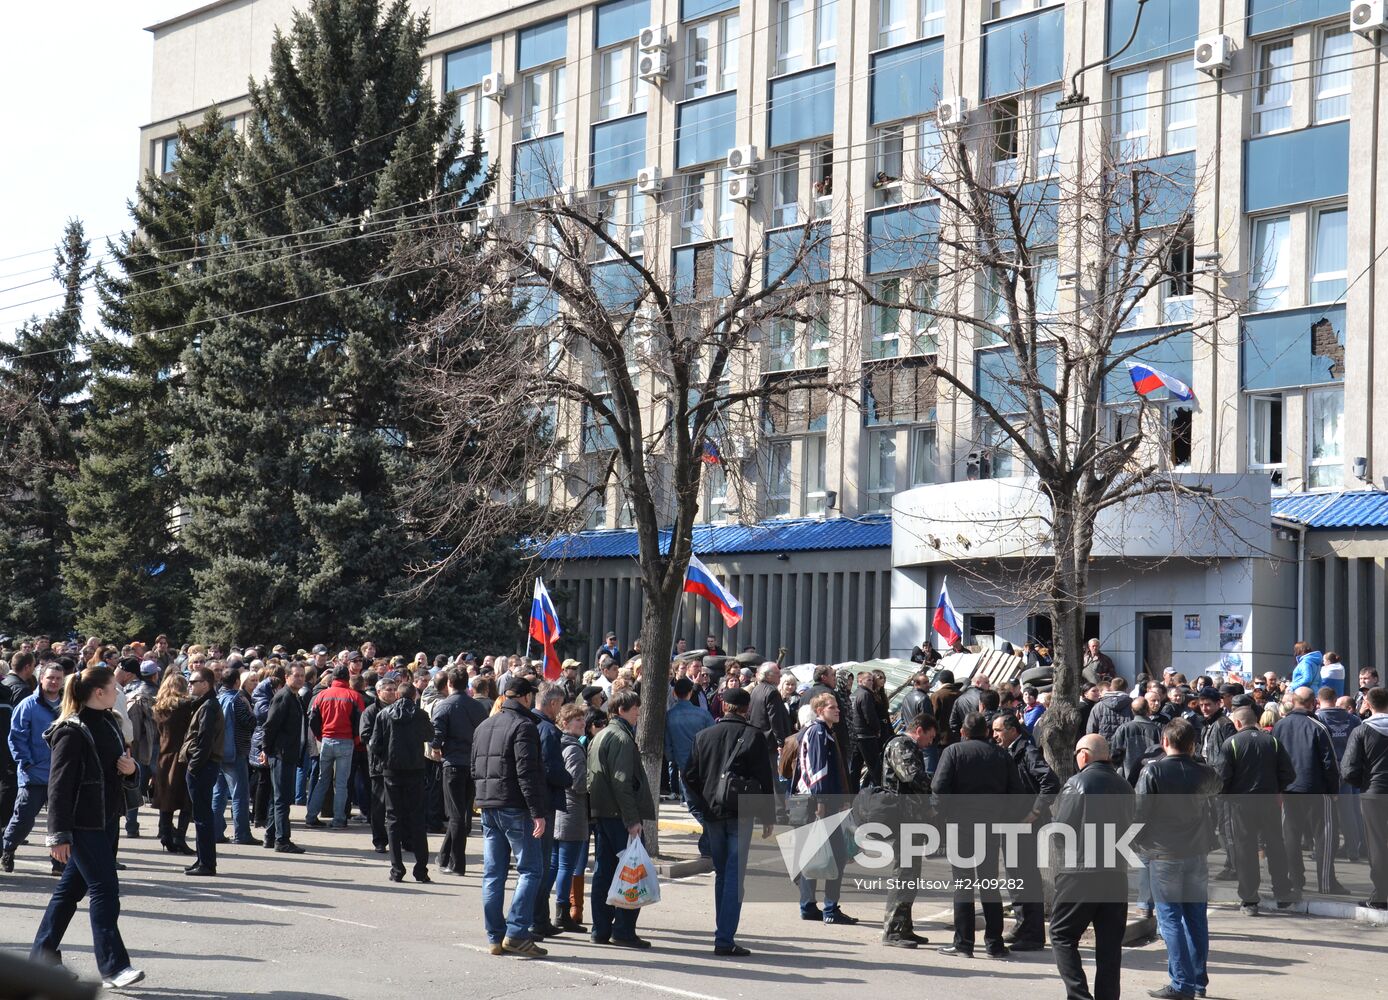 Situation in Lugansk